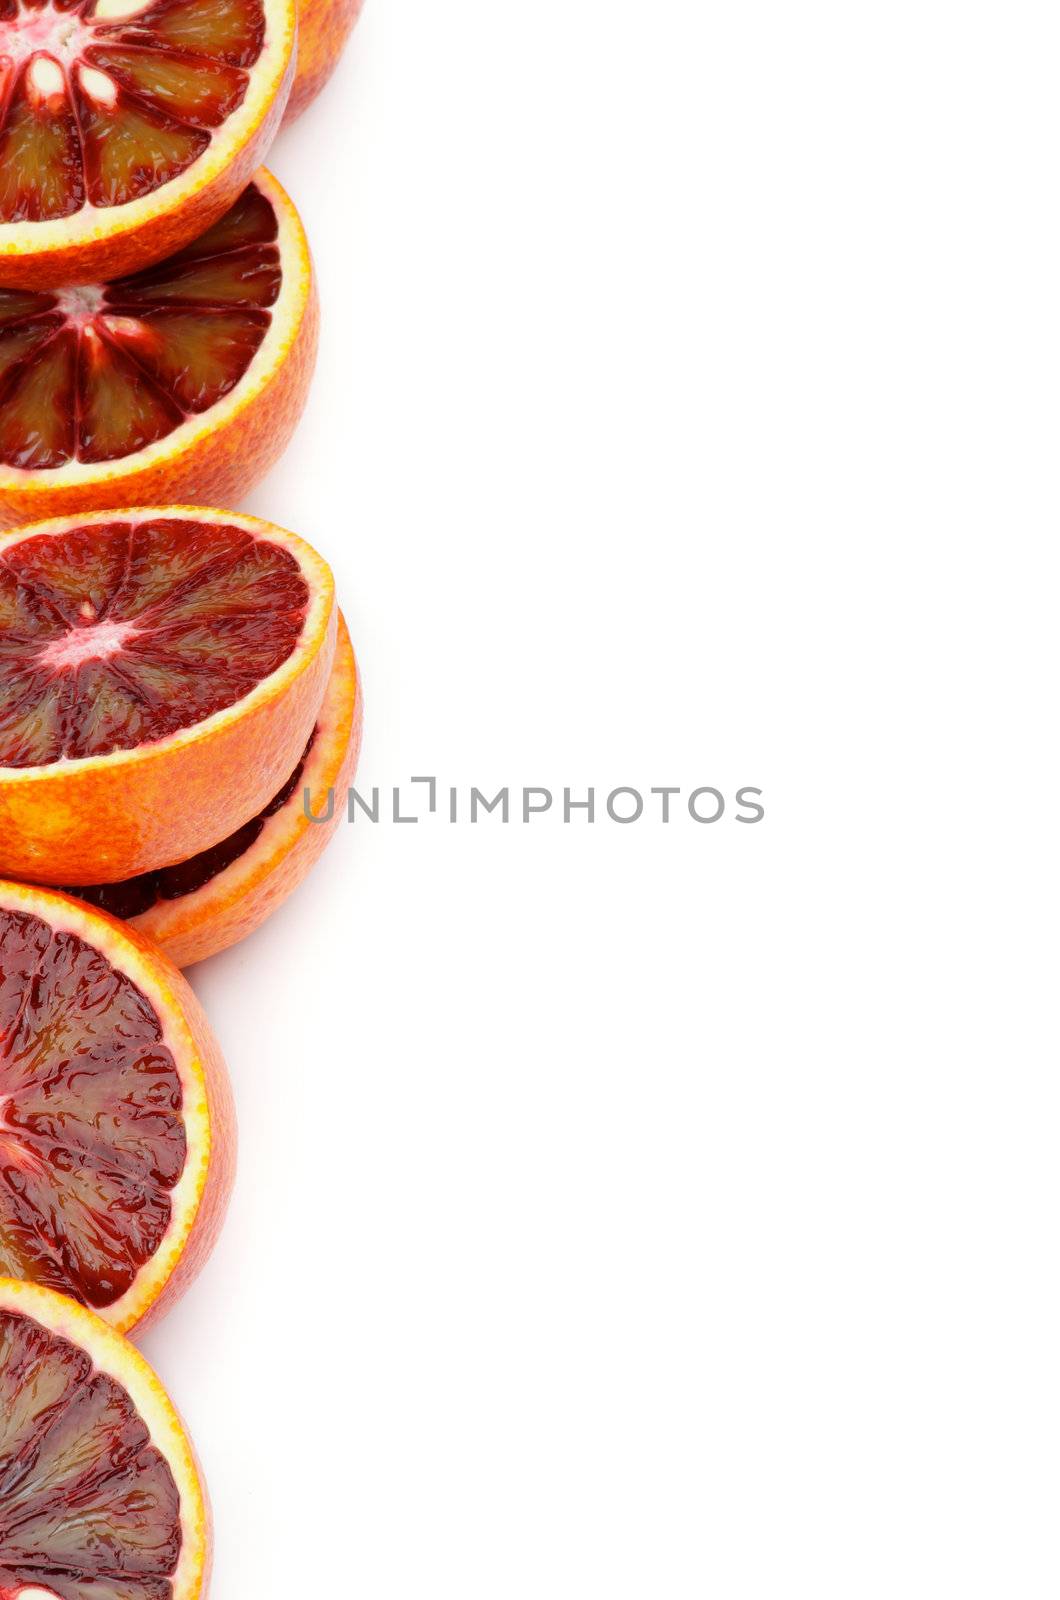 Halves of Perfect Ripe Blood Oranges as Frame closeup on white background